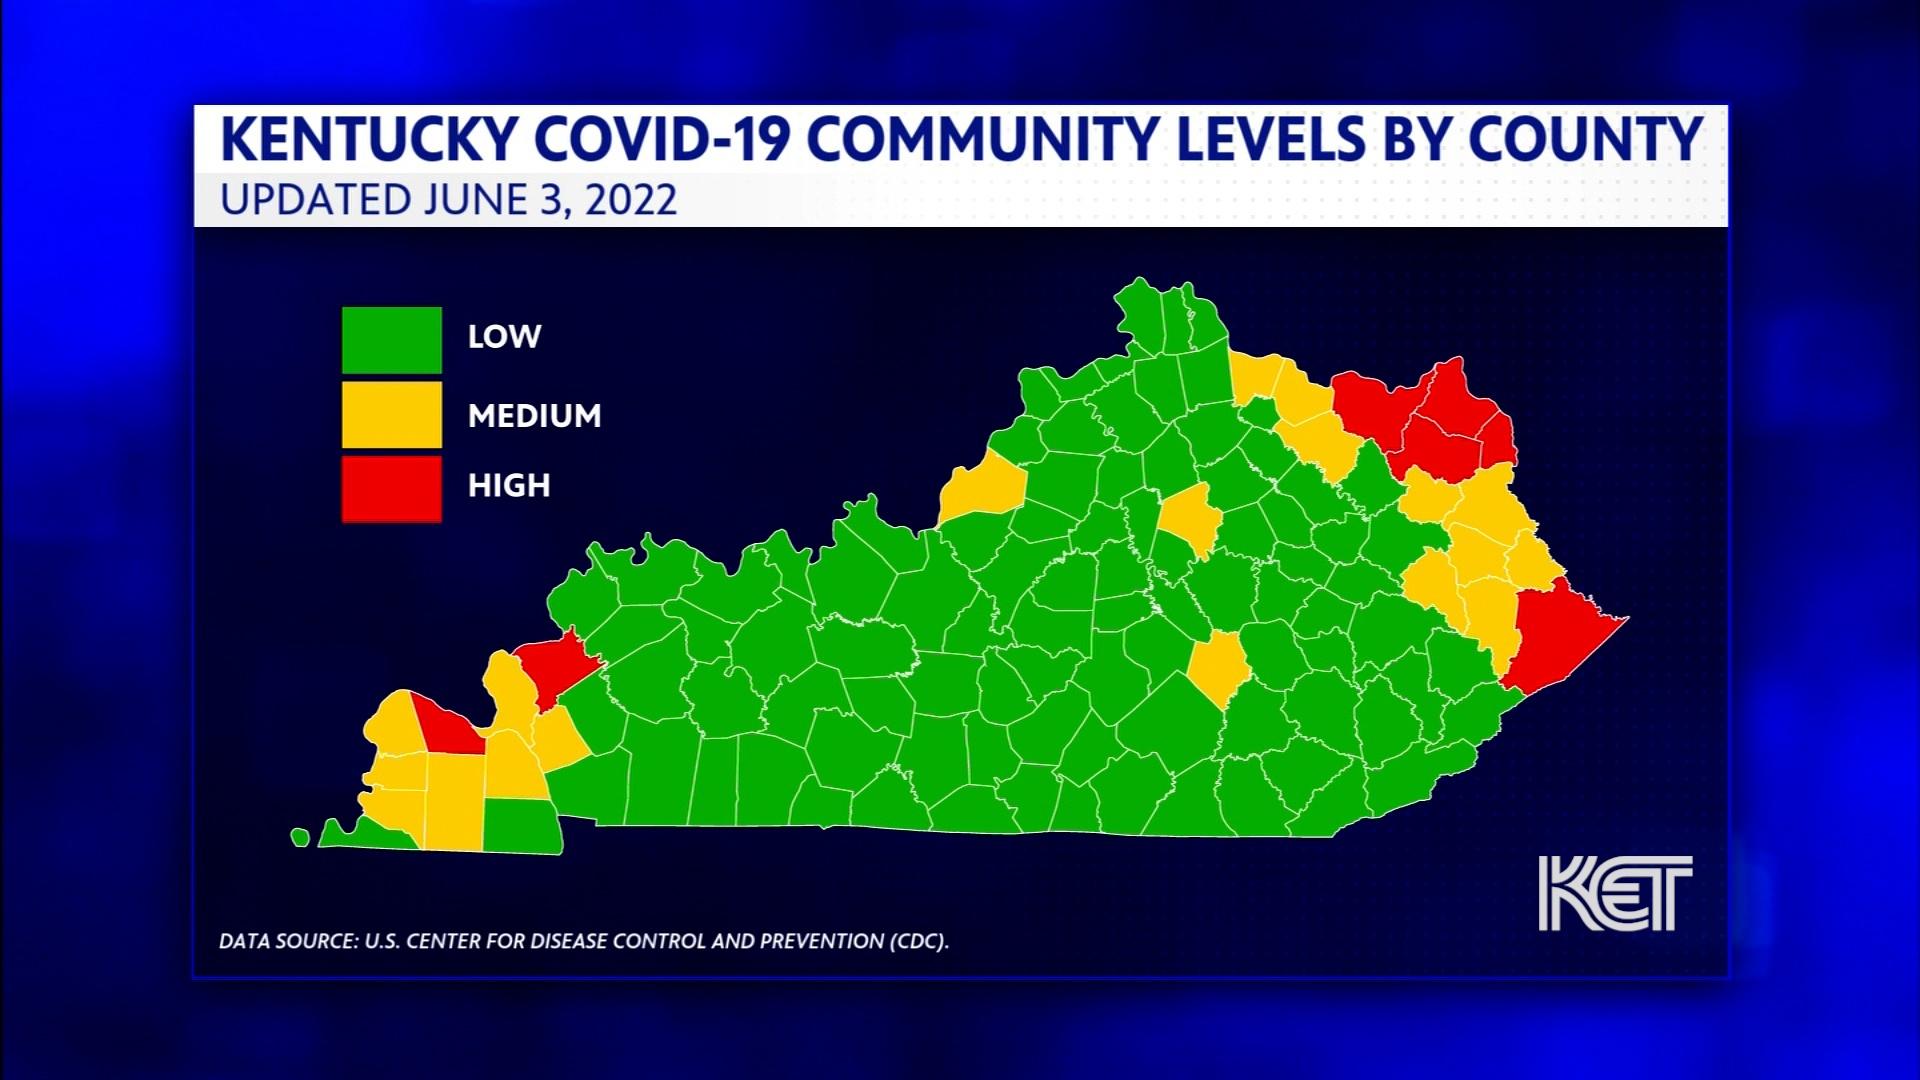 Louisville doctors continue to urge masks to prevent COVID-19